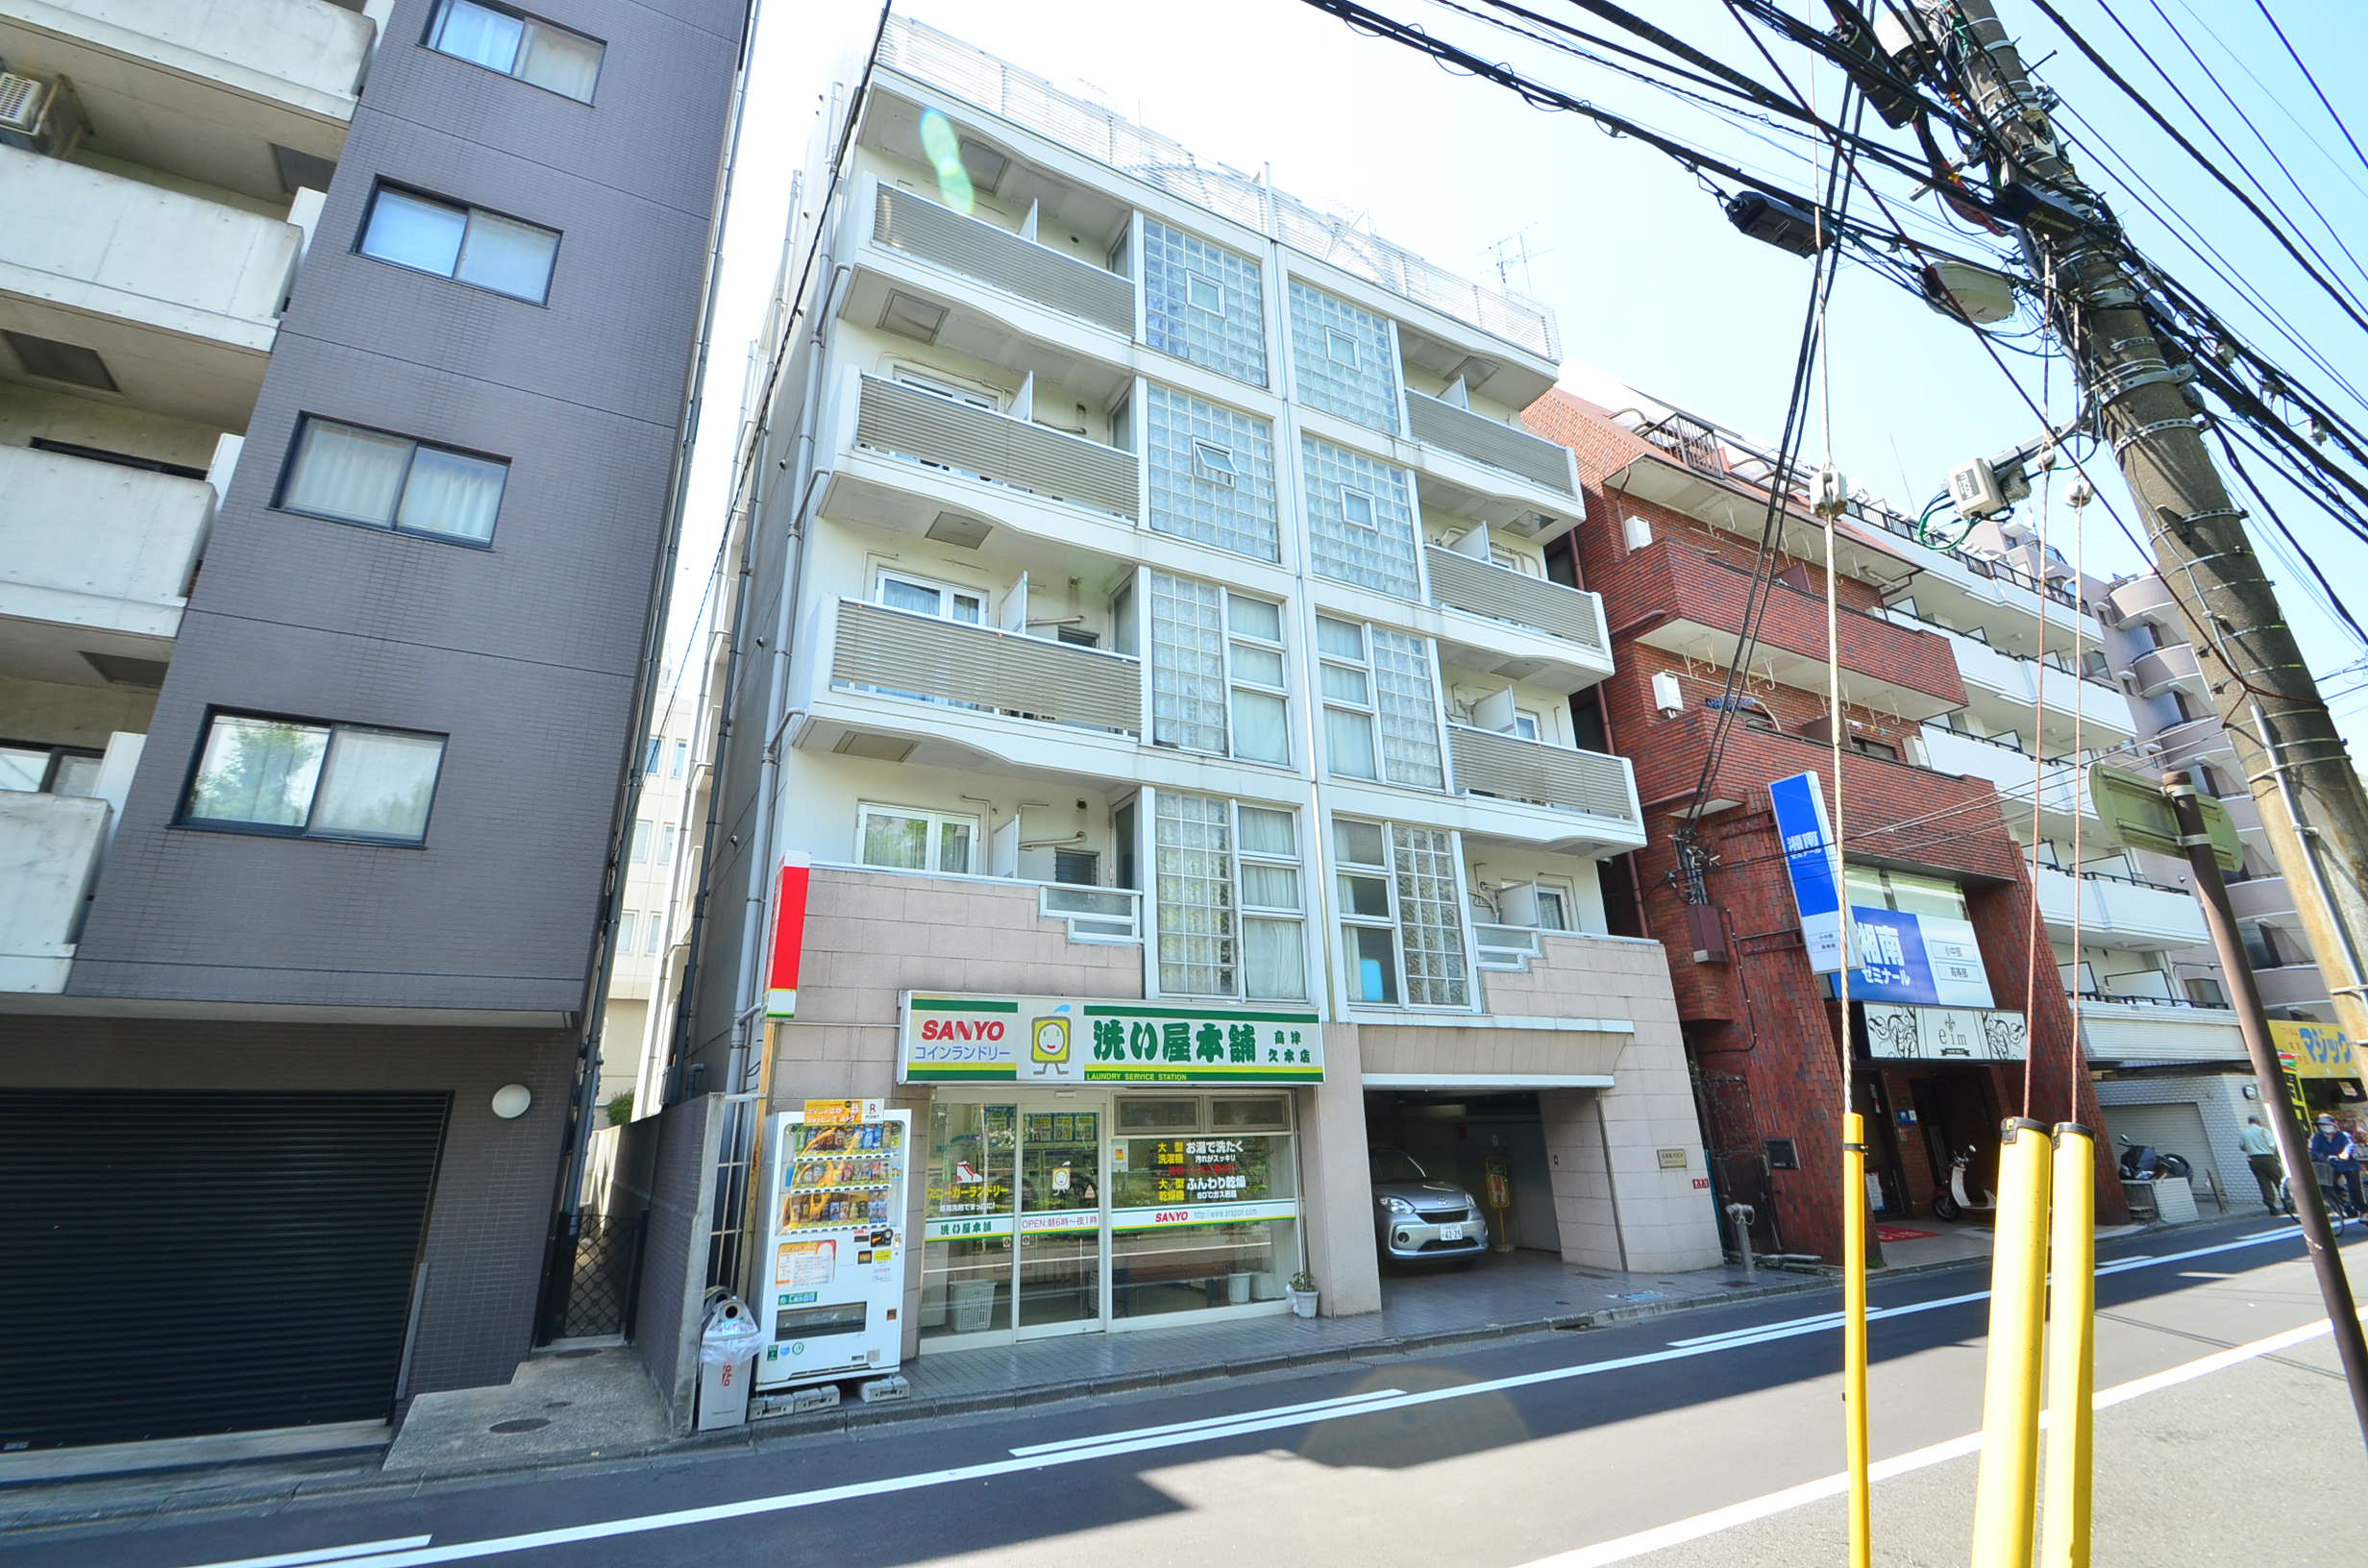 8159Tohto Monthly Laforet Musashi-Nakahara【WiFi internet free ★Auto-locking ★Two people can move in ★6 min walk from Musashi Nakahara station】